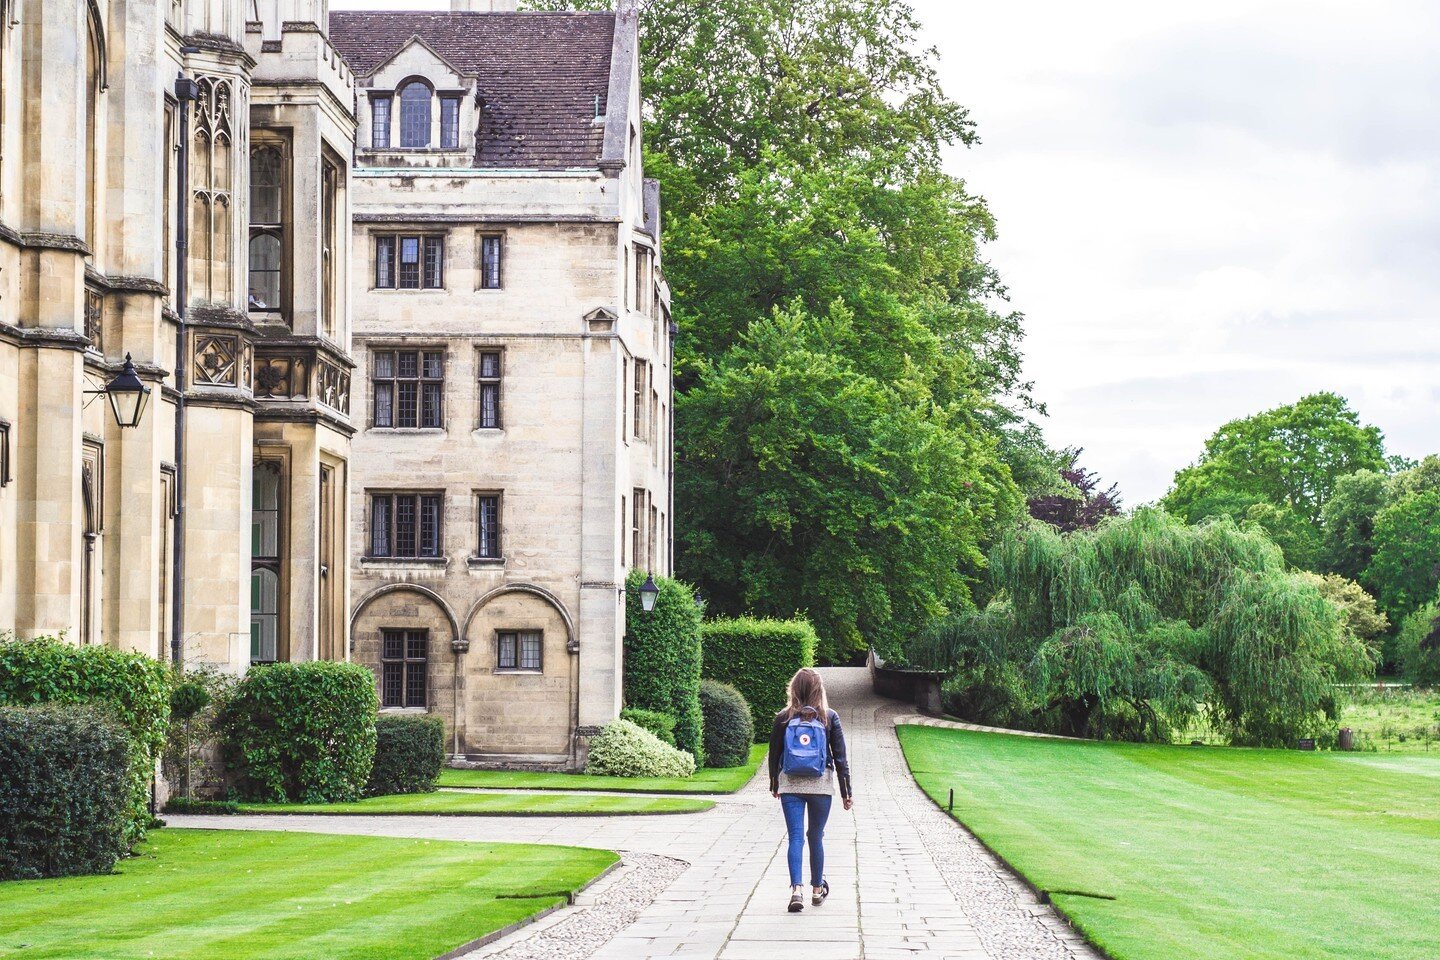 Is your baby going off to college?

Transitioning to being an empty nester can be challenging, but it's also a chance for growth and new beginnings. Here are some tips that have helped me and my spouse manage this change:
1. Stay connected with your 